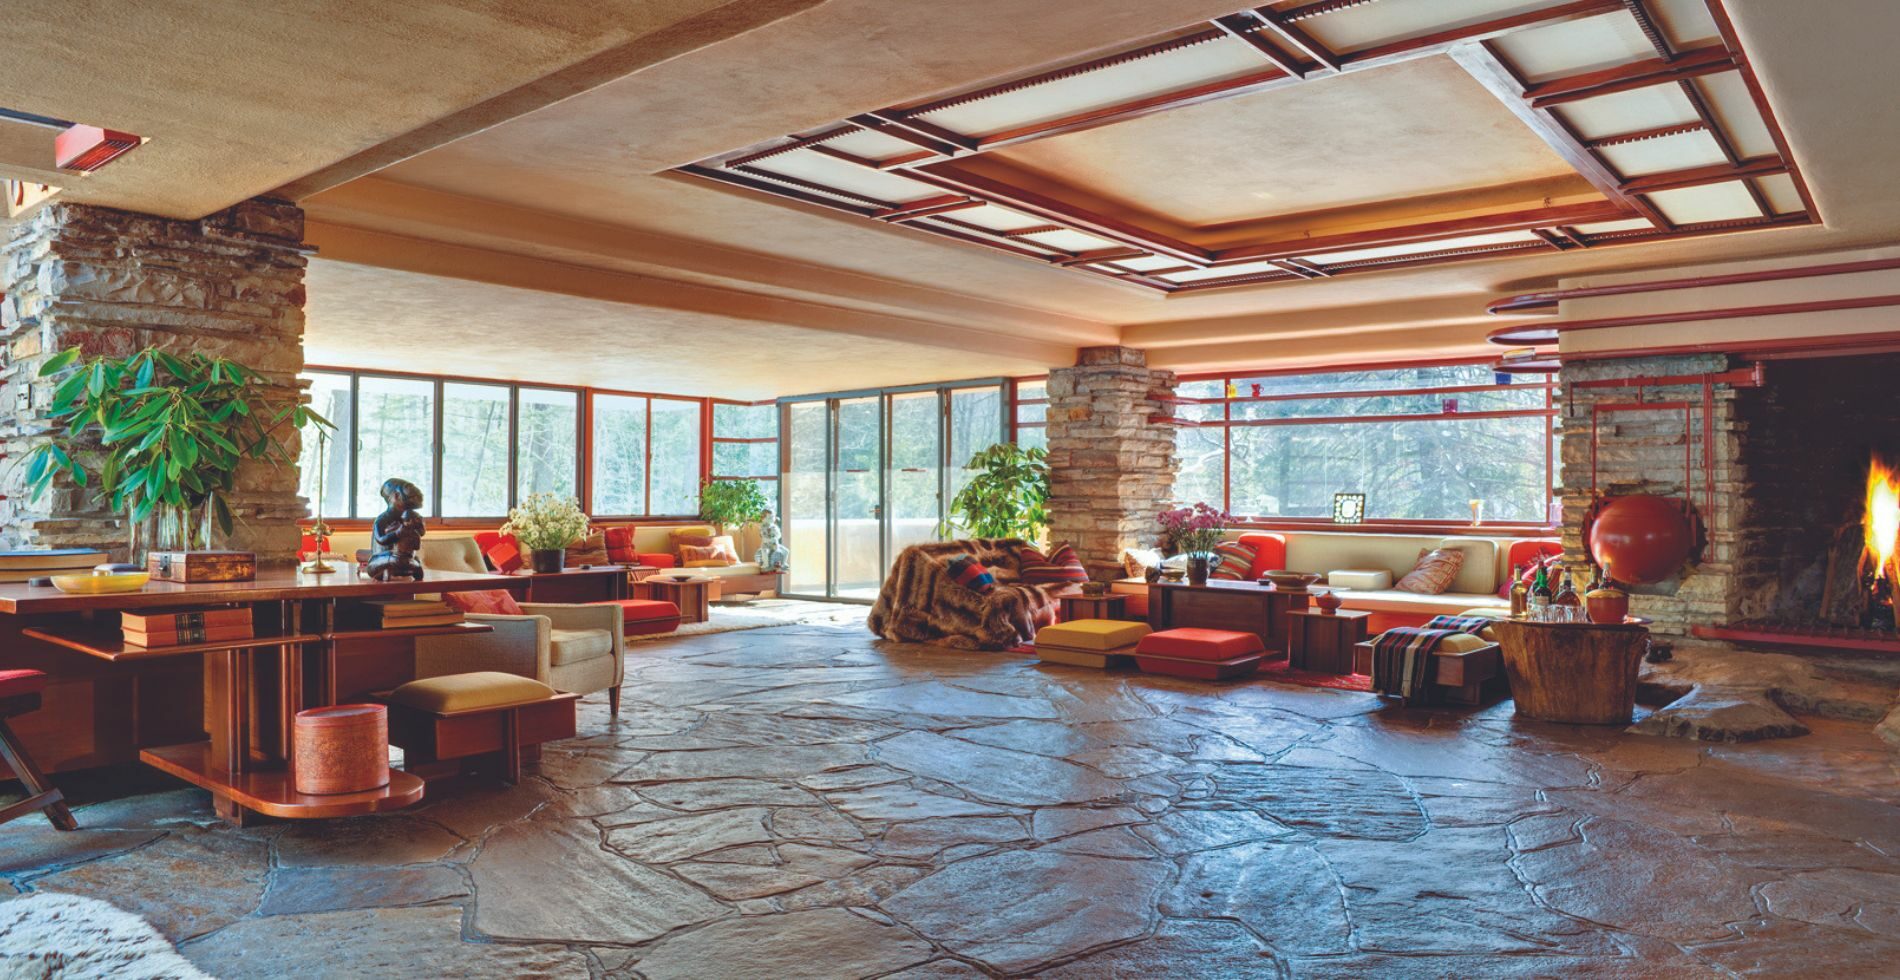 A view of the living room in the famous “Falling Water” home designed by Frank Lloyd Wright